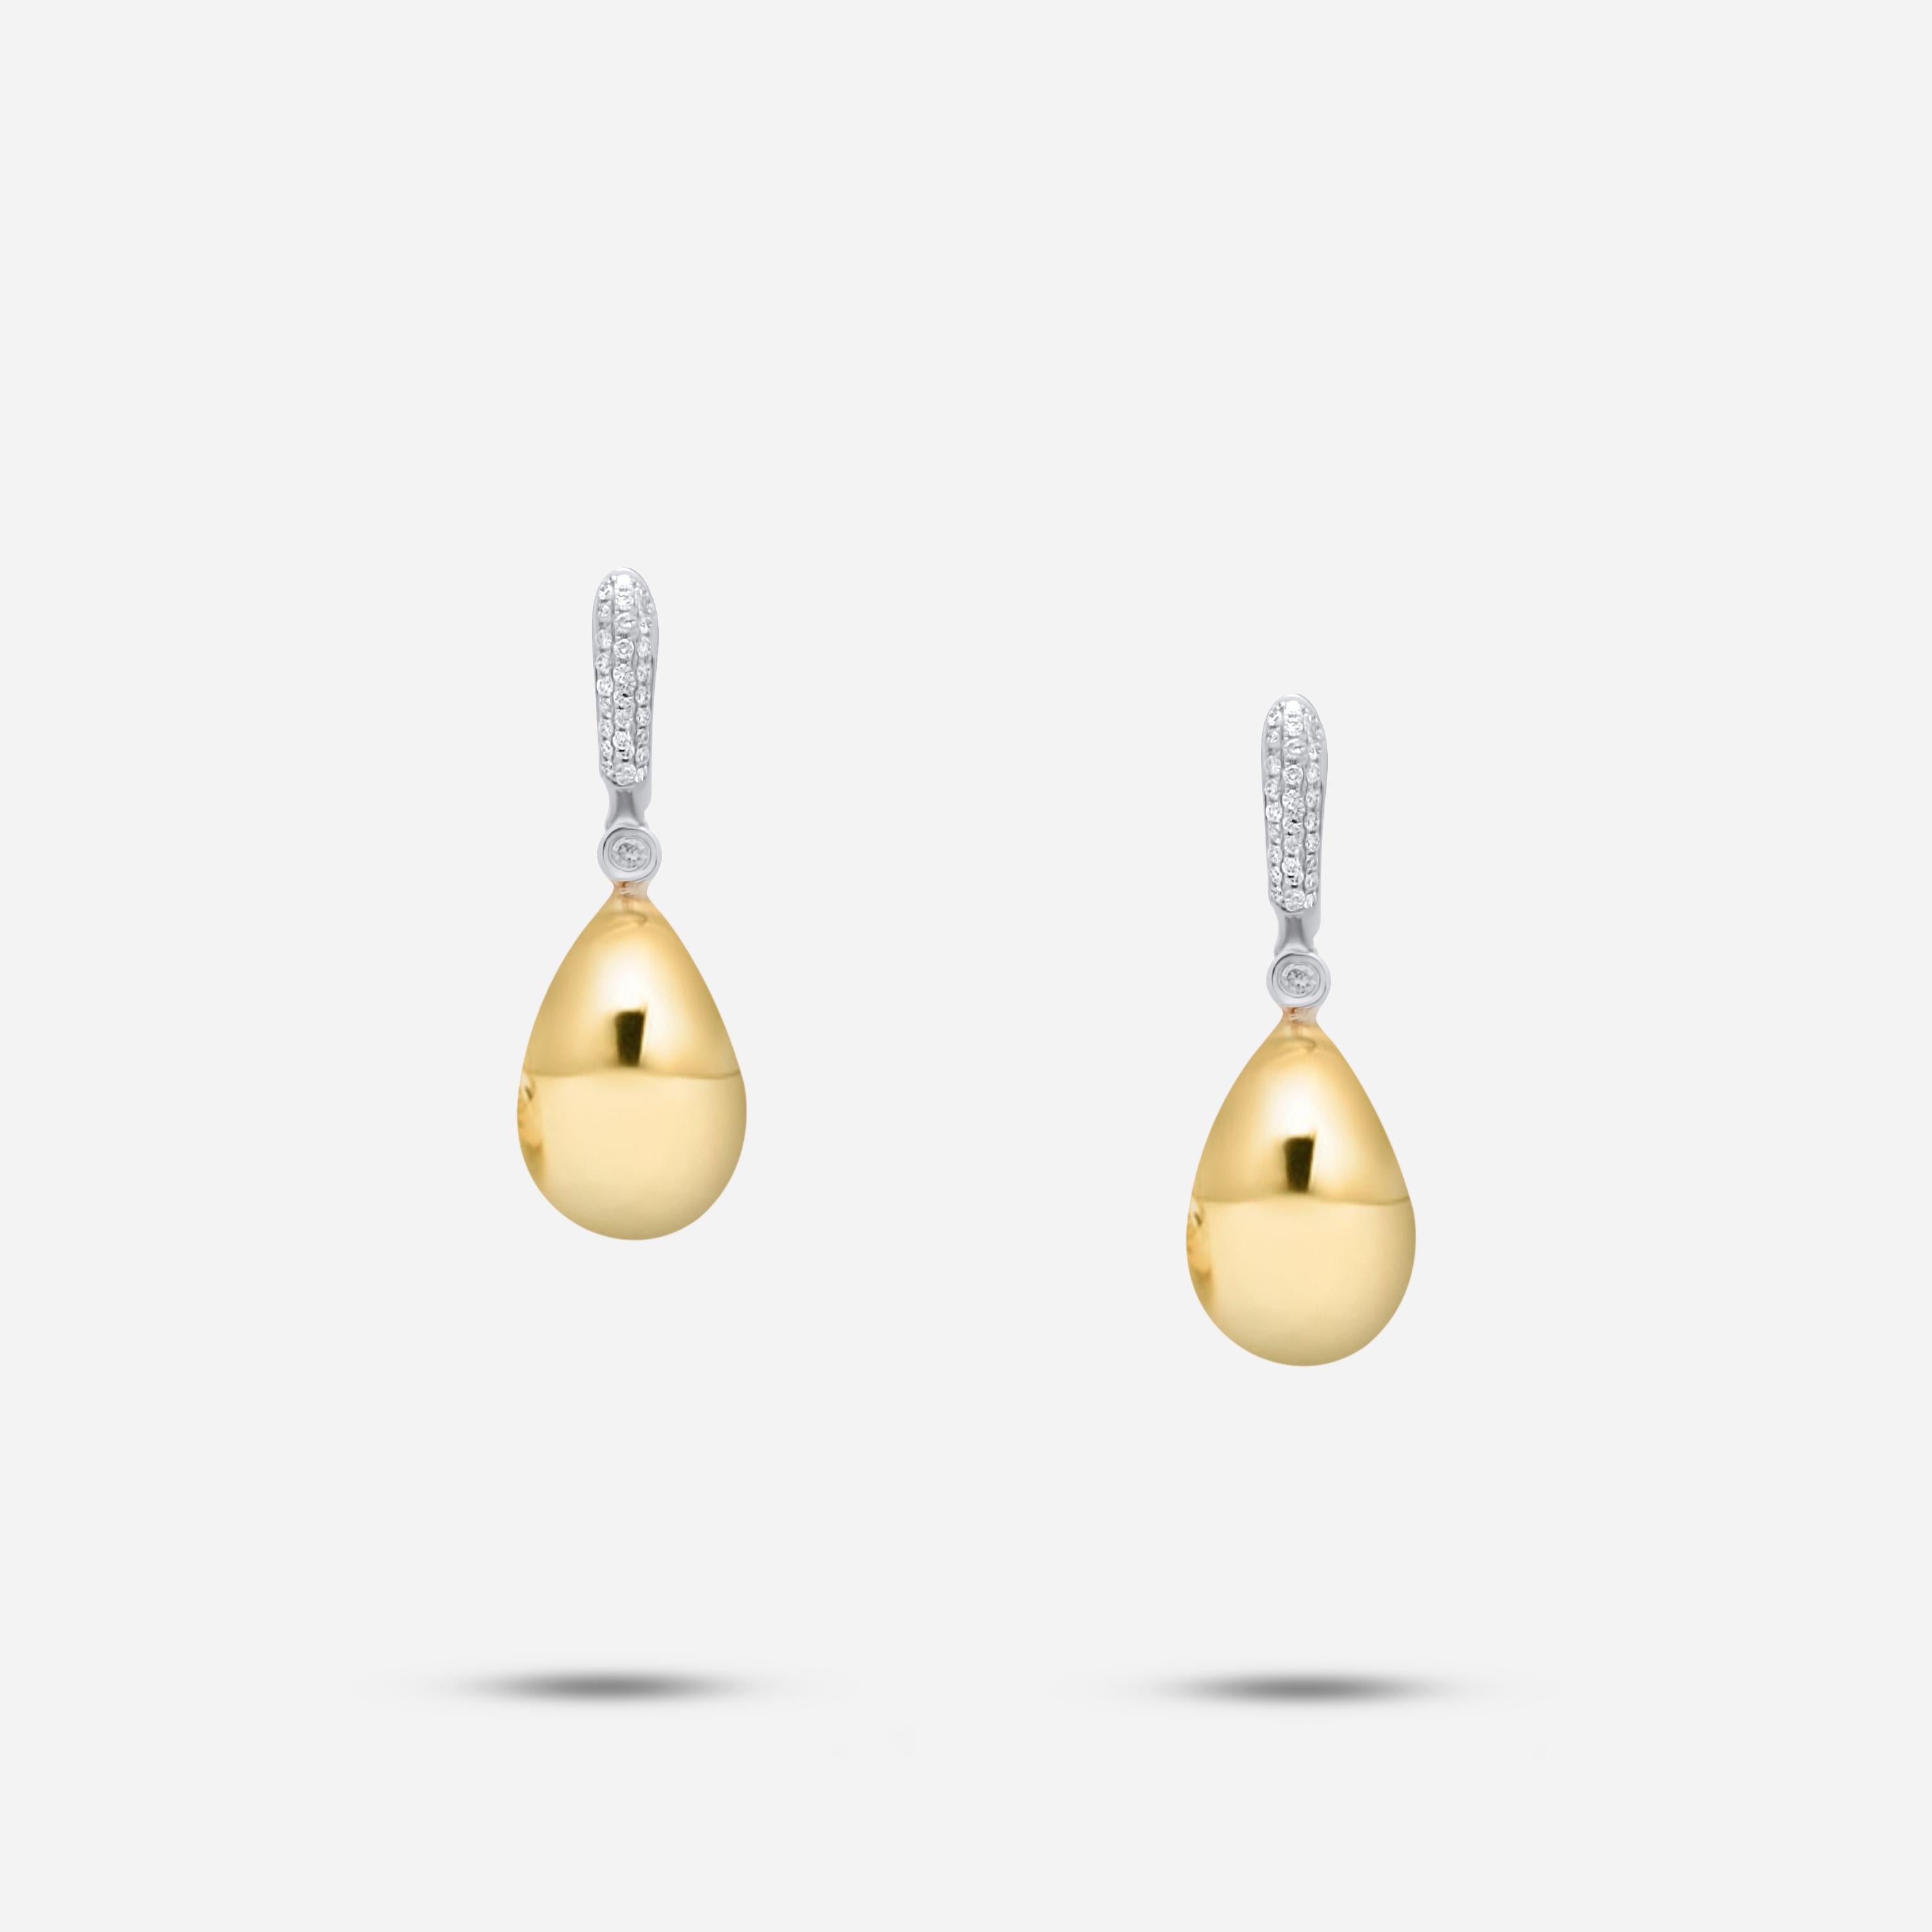 Golden Pear Water Tear Drop Shape Diamond Pave 18K Gold Huggie Drop Earrings
18 Karat Yellow Gold
1.00 CTs Diamonds

Important Information:
Please note that this item will take 2-4 weeks to deliver - it is showcased overseas in one of our jewelry